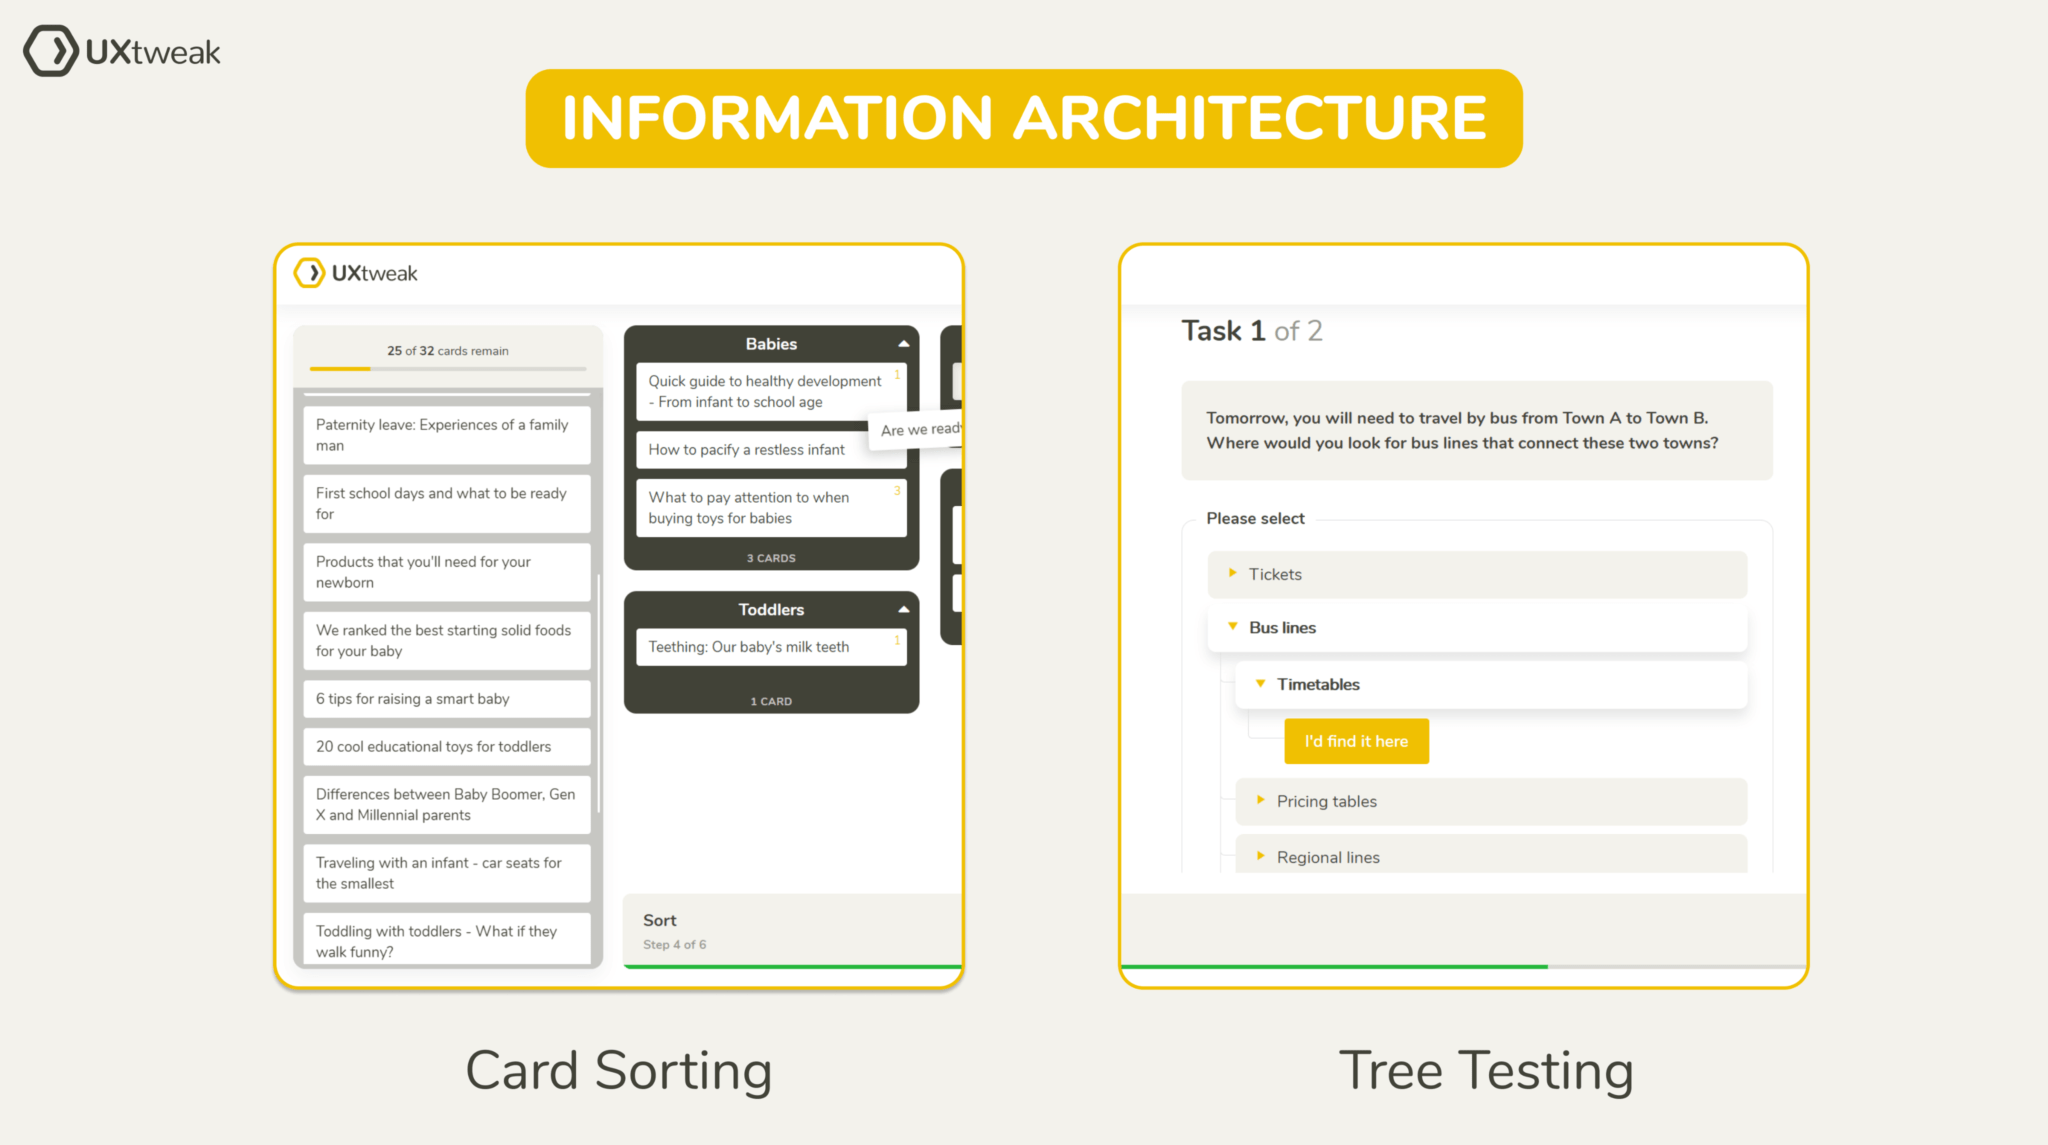 end user experience, card sorting tree testing